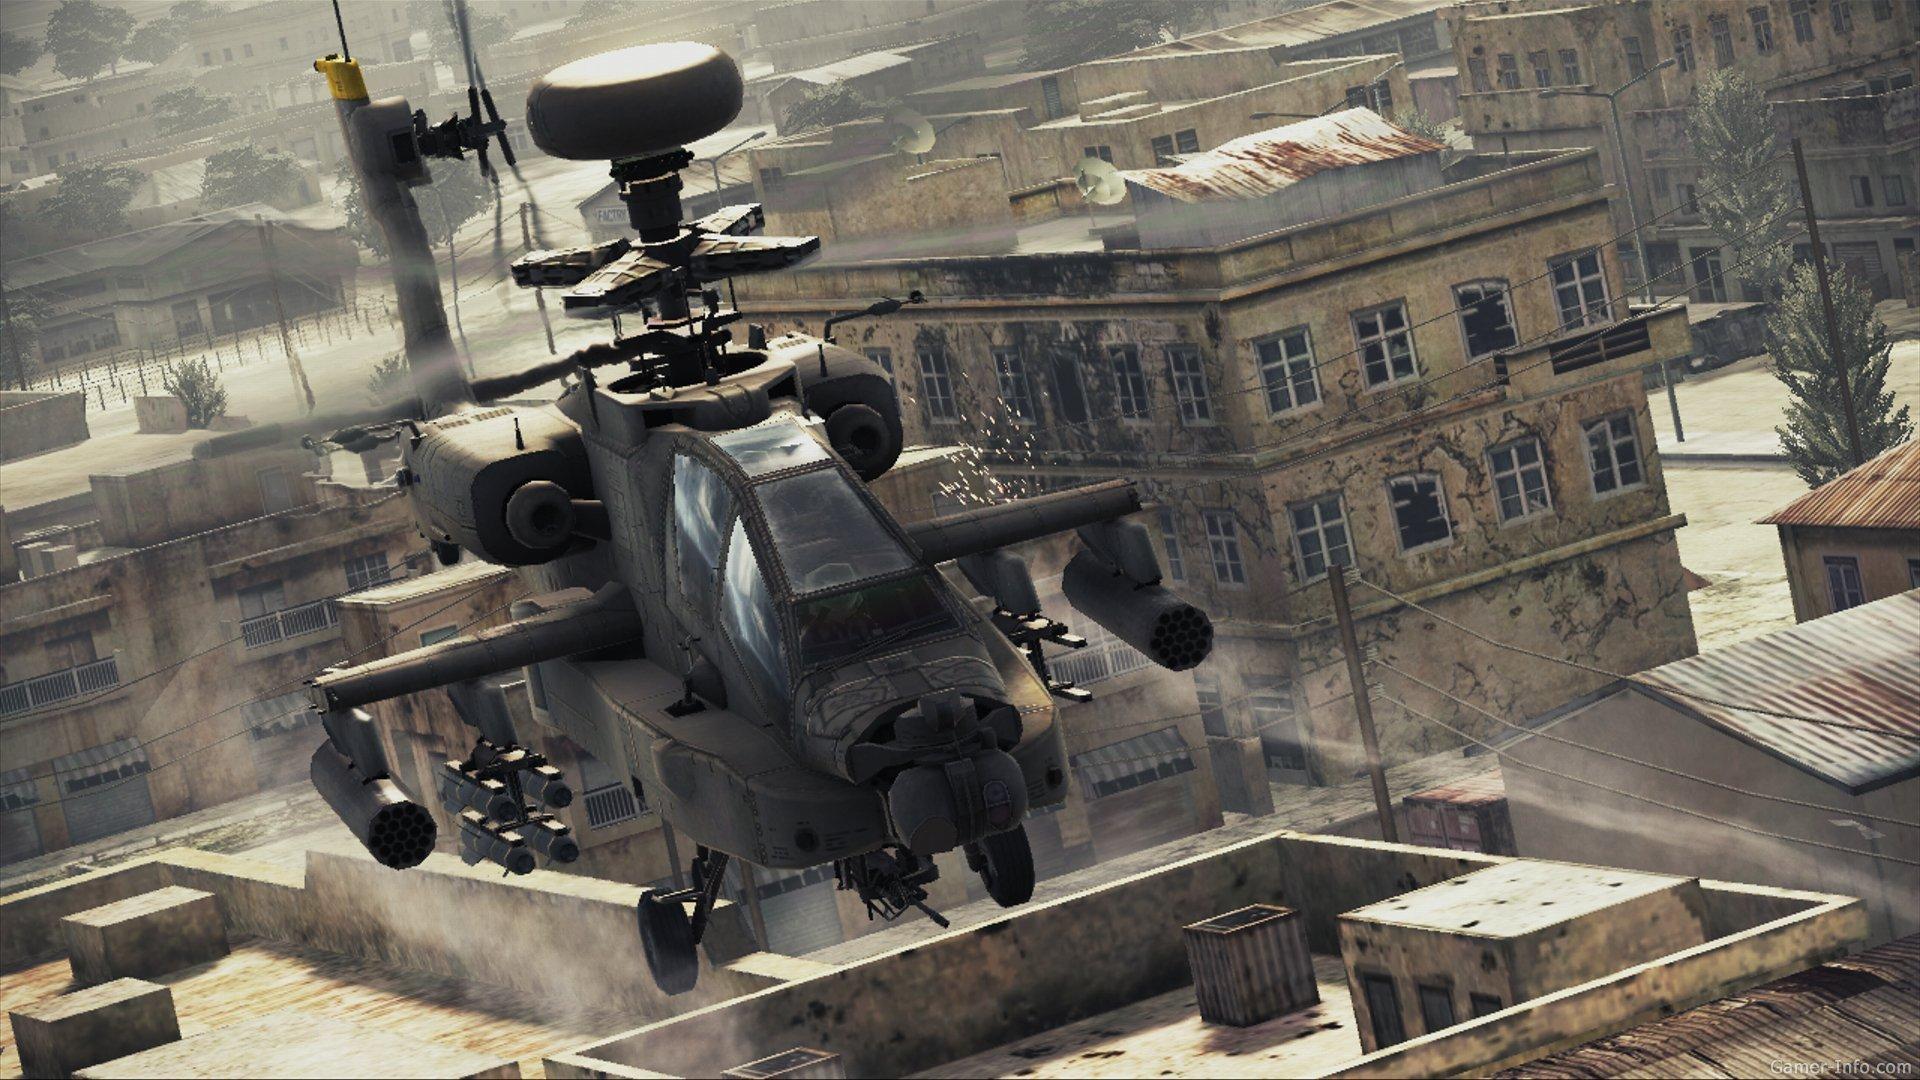 AH 64 APACHE Attack Helicopter Army Military Weapon (29) Wallpaper